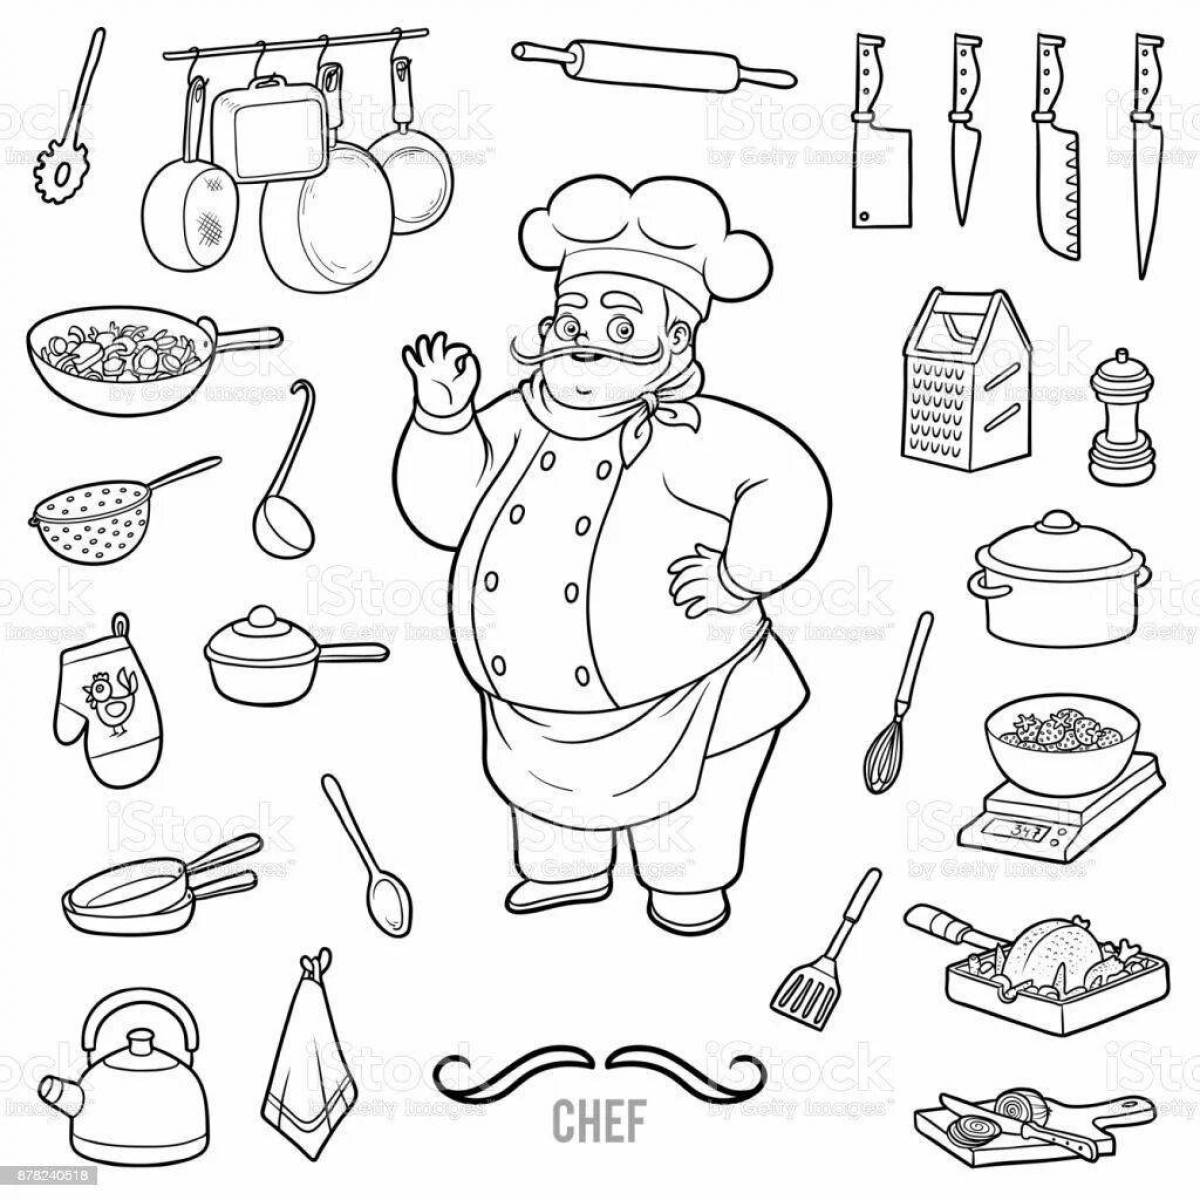 Coloring book shining chef